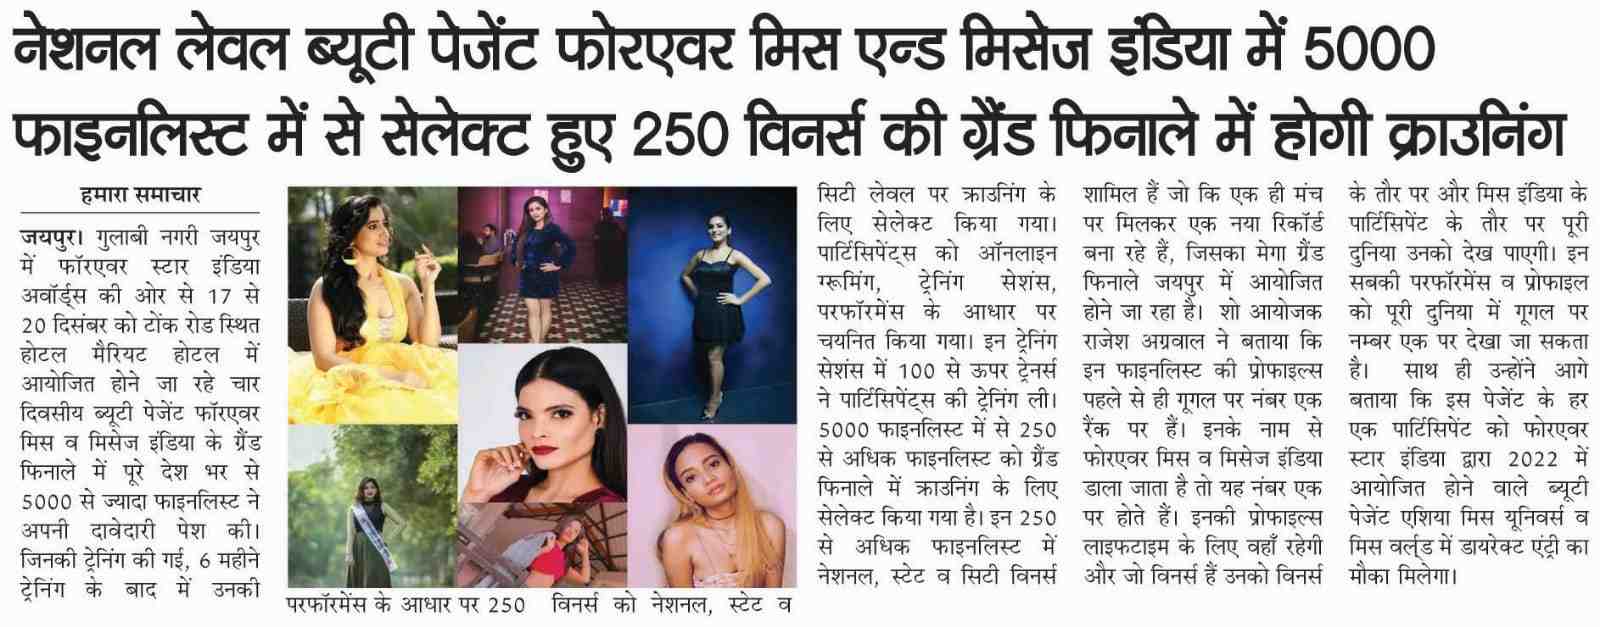 250+ Crwonings will be done in National Level Beauty Pageant